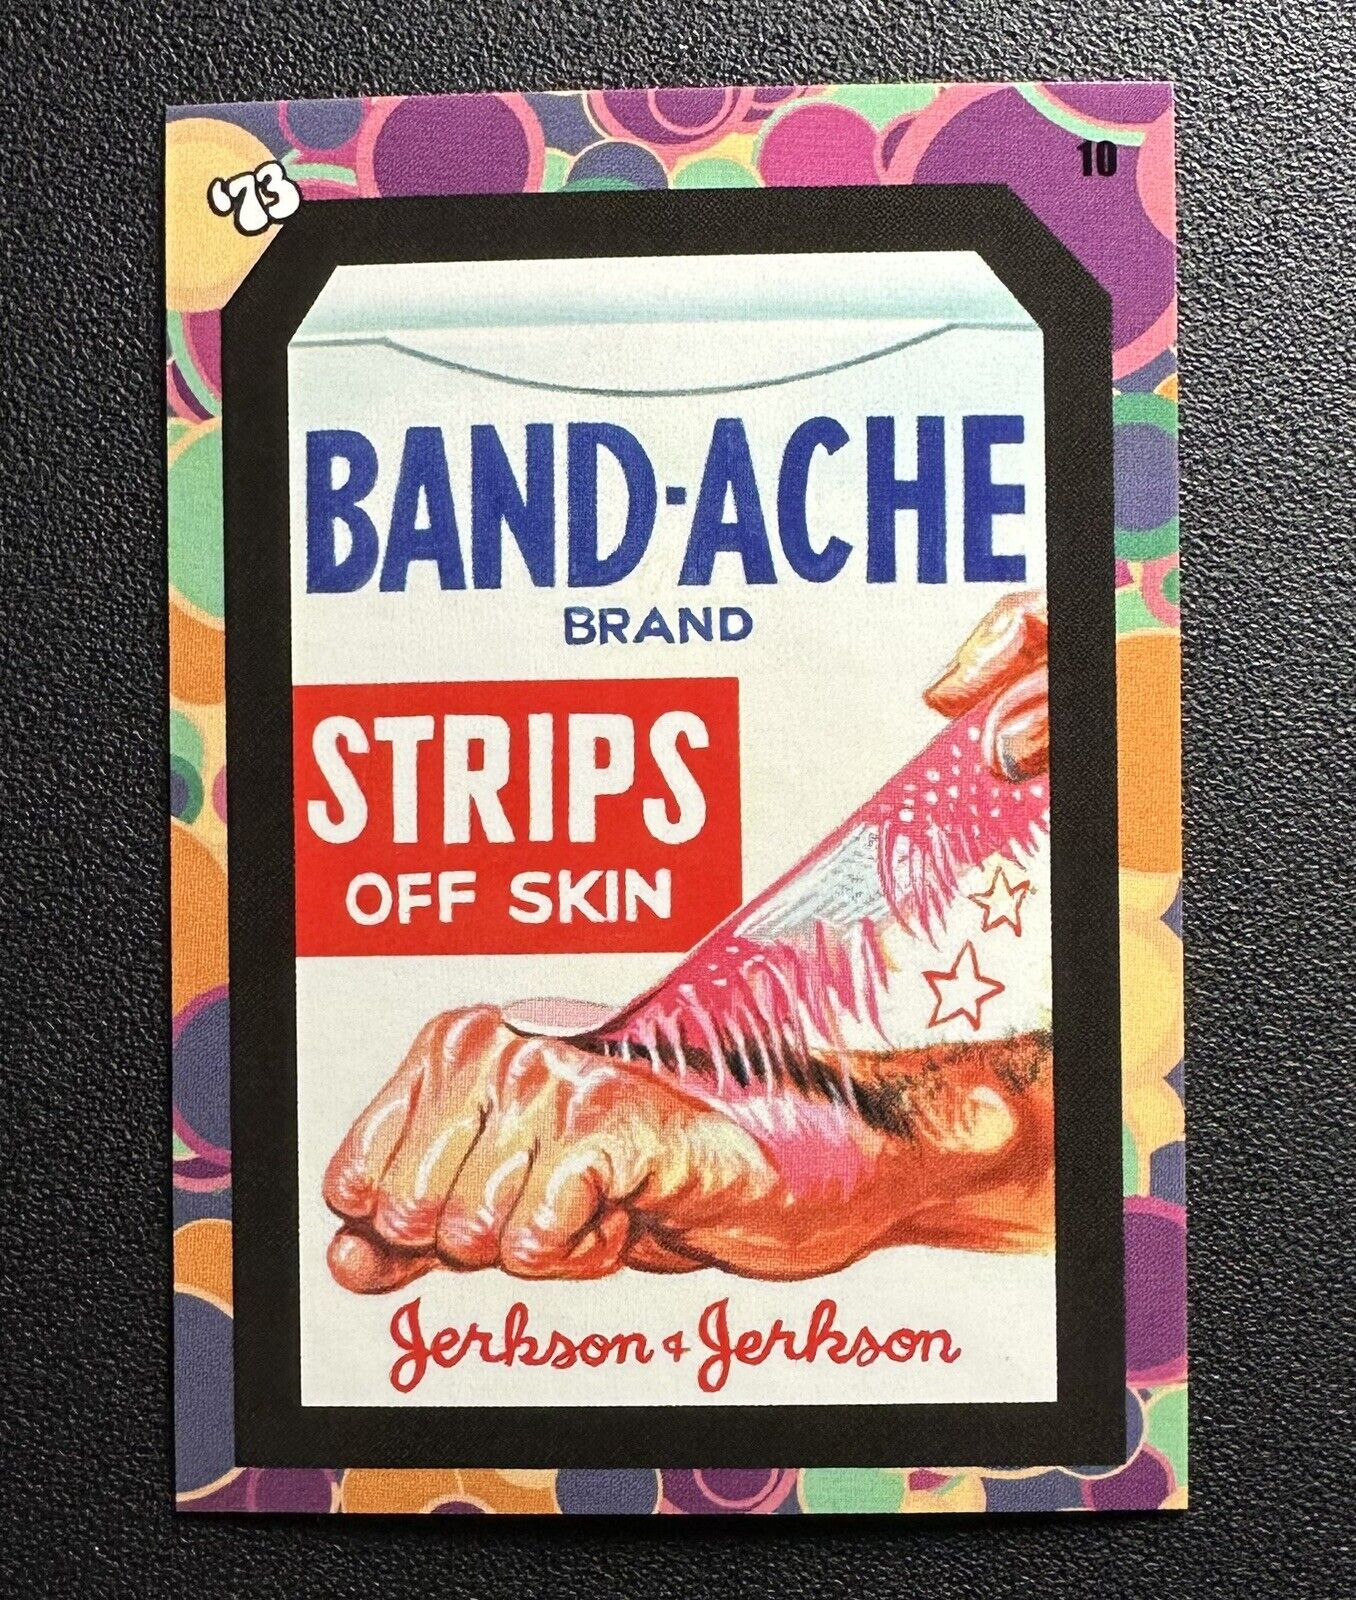 2023 Topps Wacky Packages Flashback ’73 #10 BAND-ACHE STRIPS card in Toploader